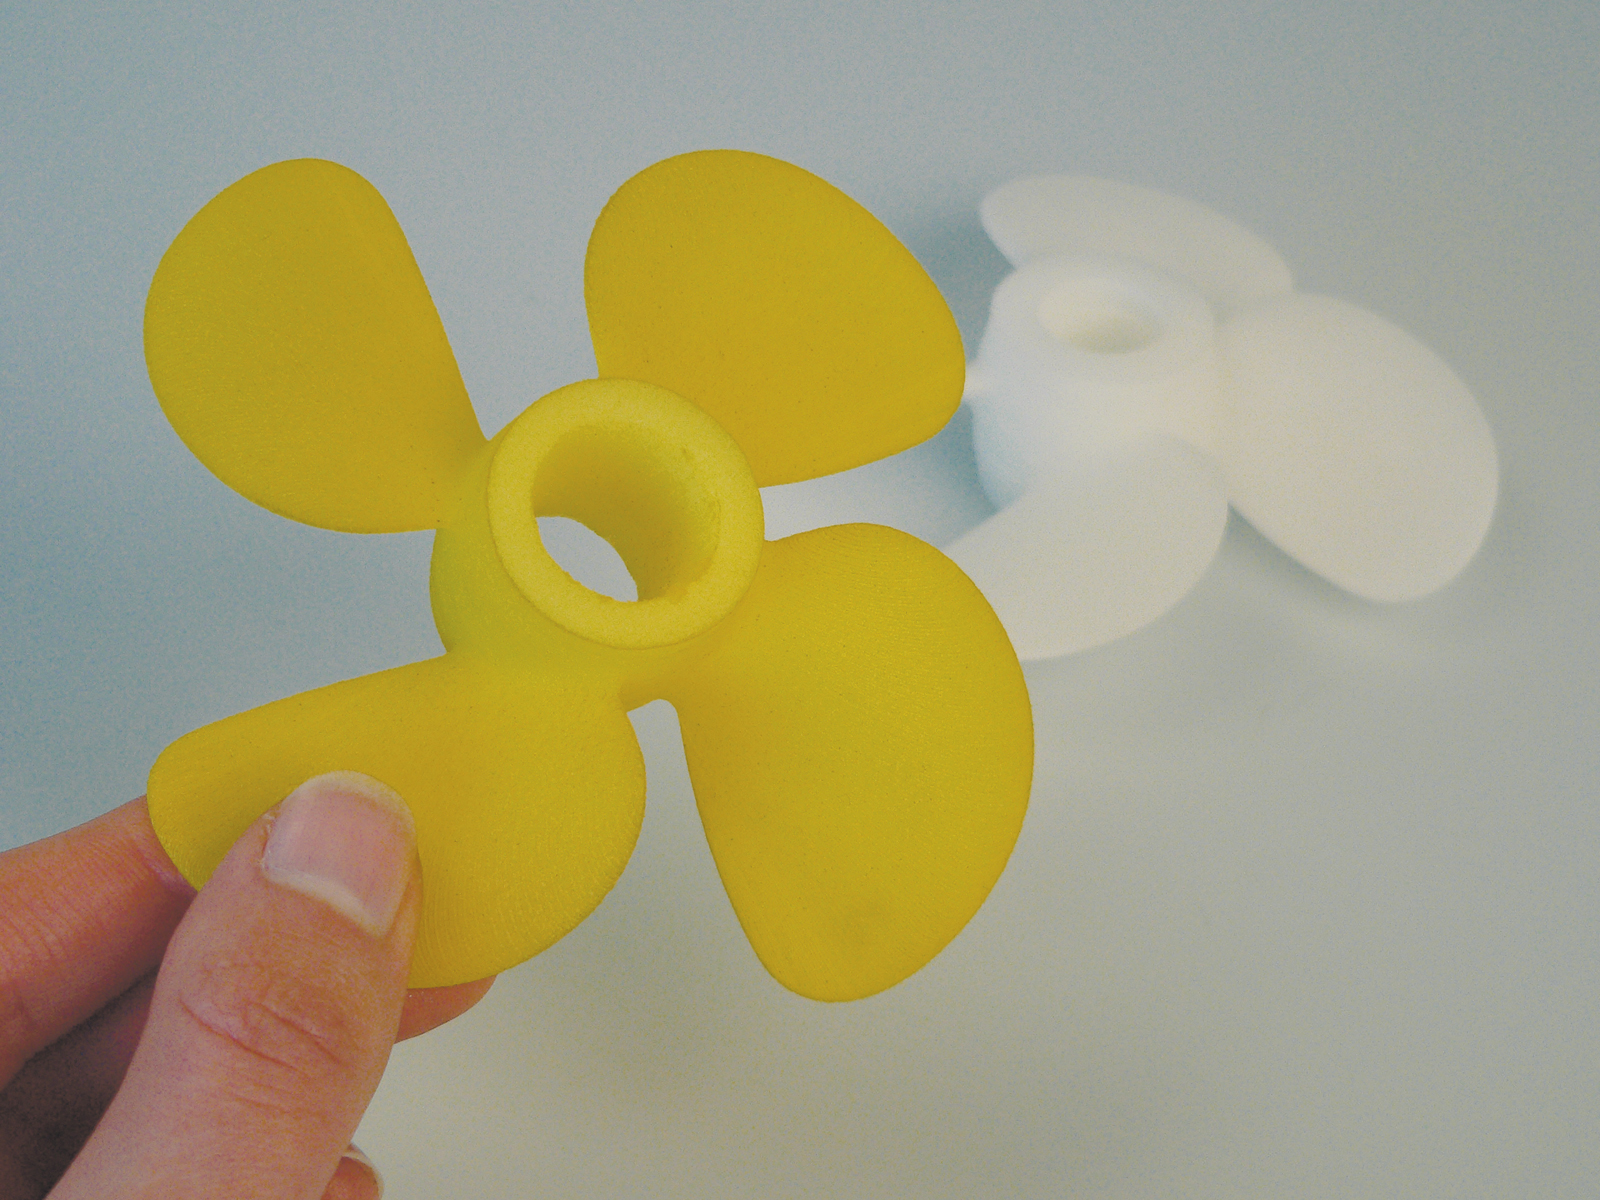 Image: Propeller dyed yellow